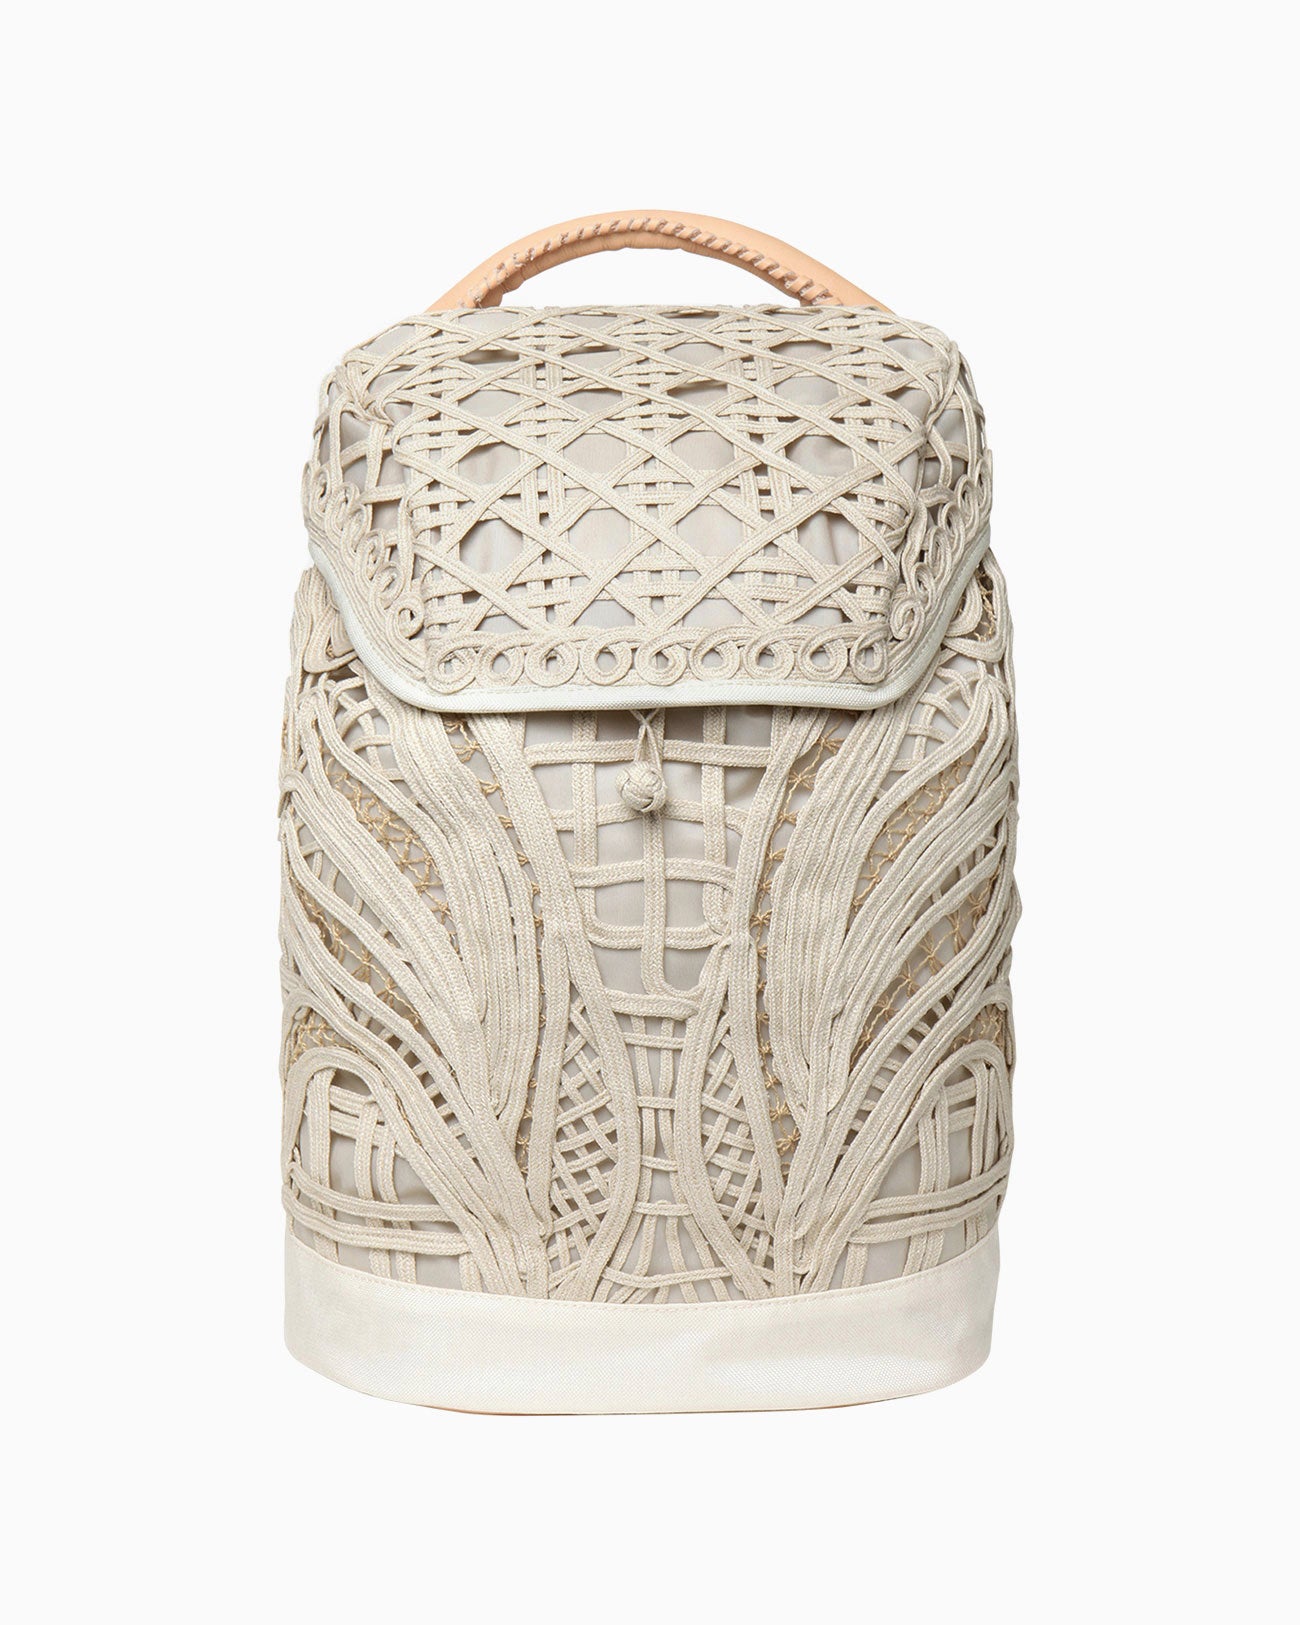 Cording Embroidery Backpack - beige